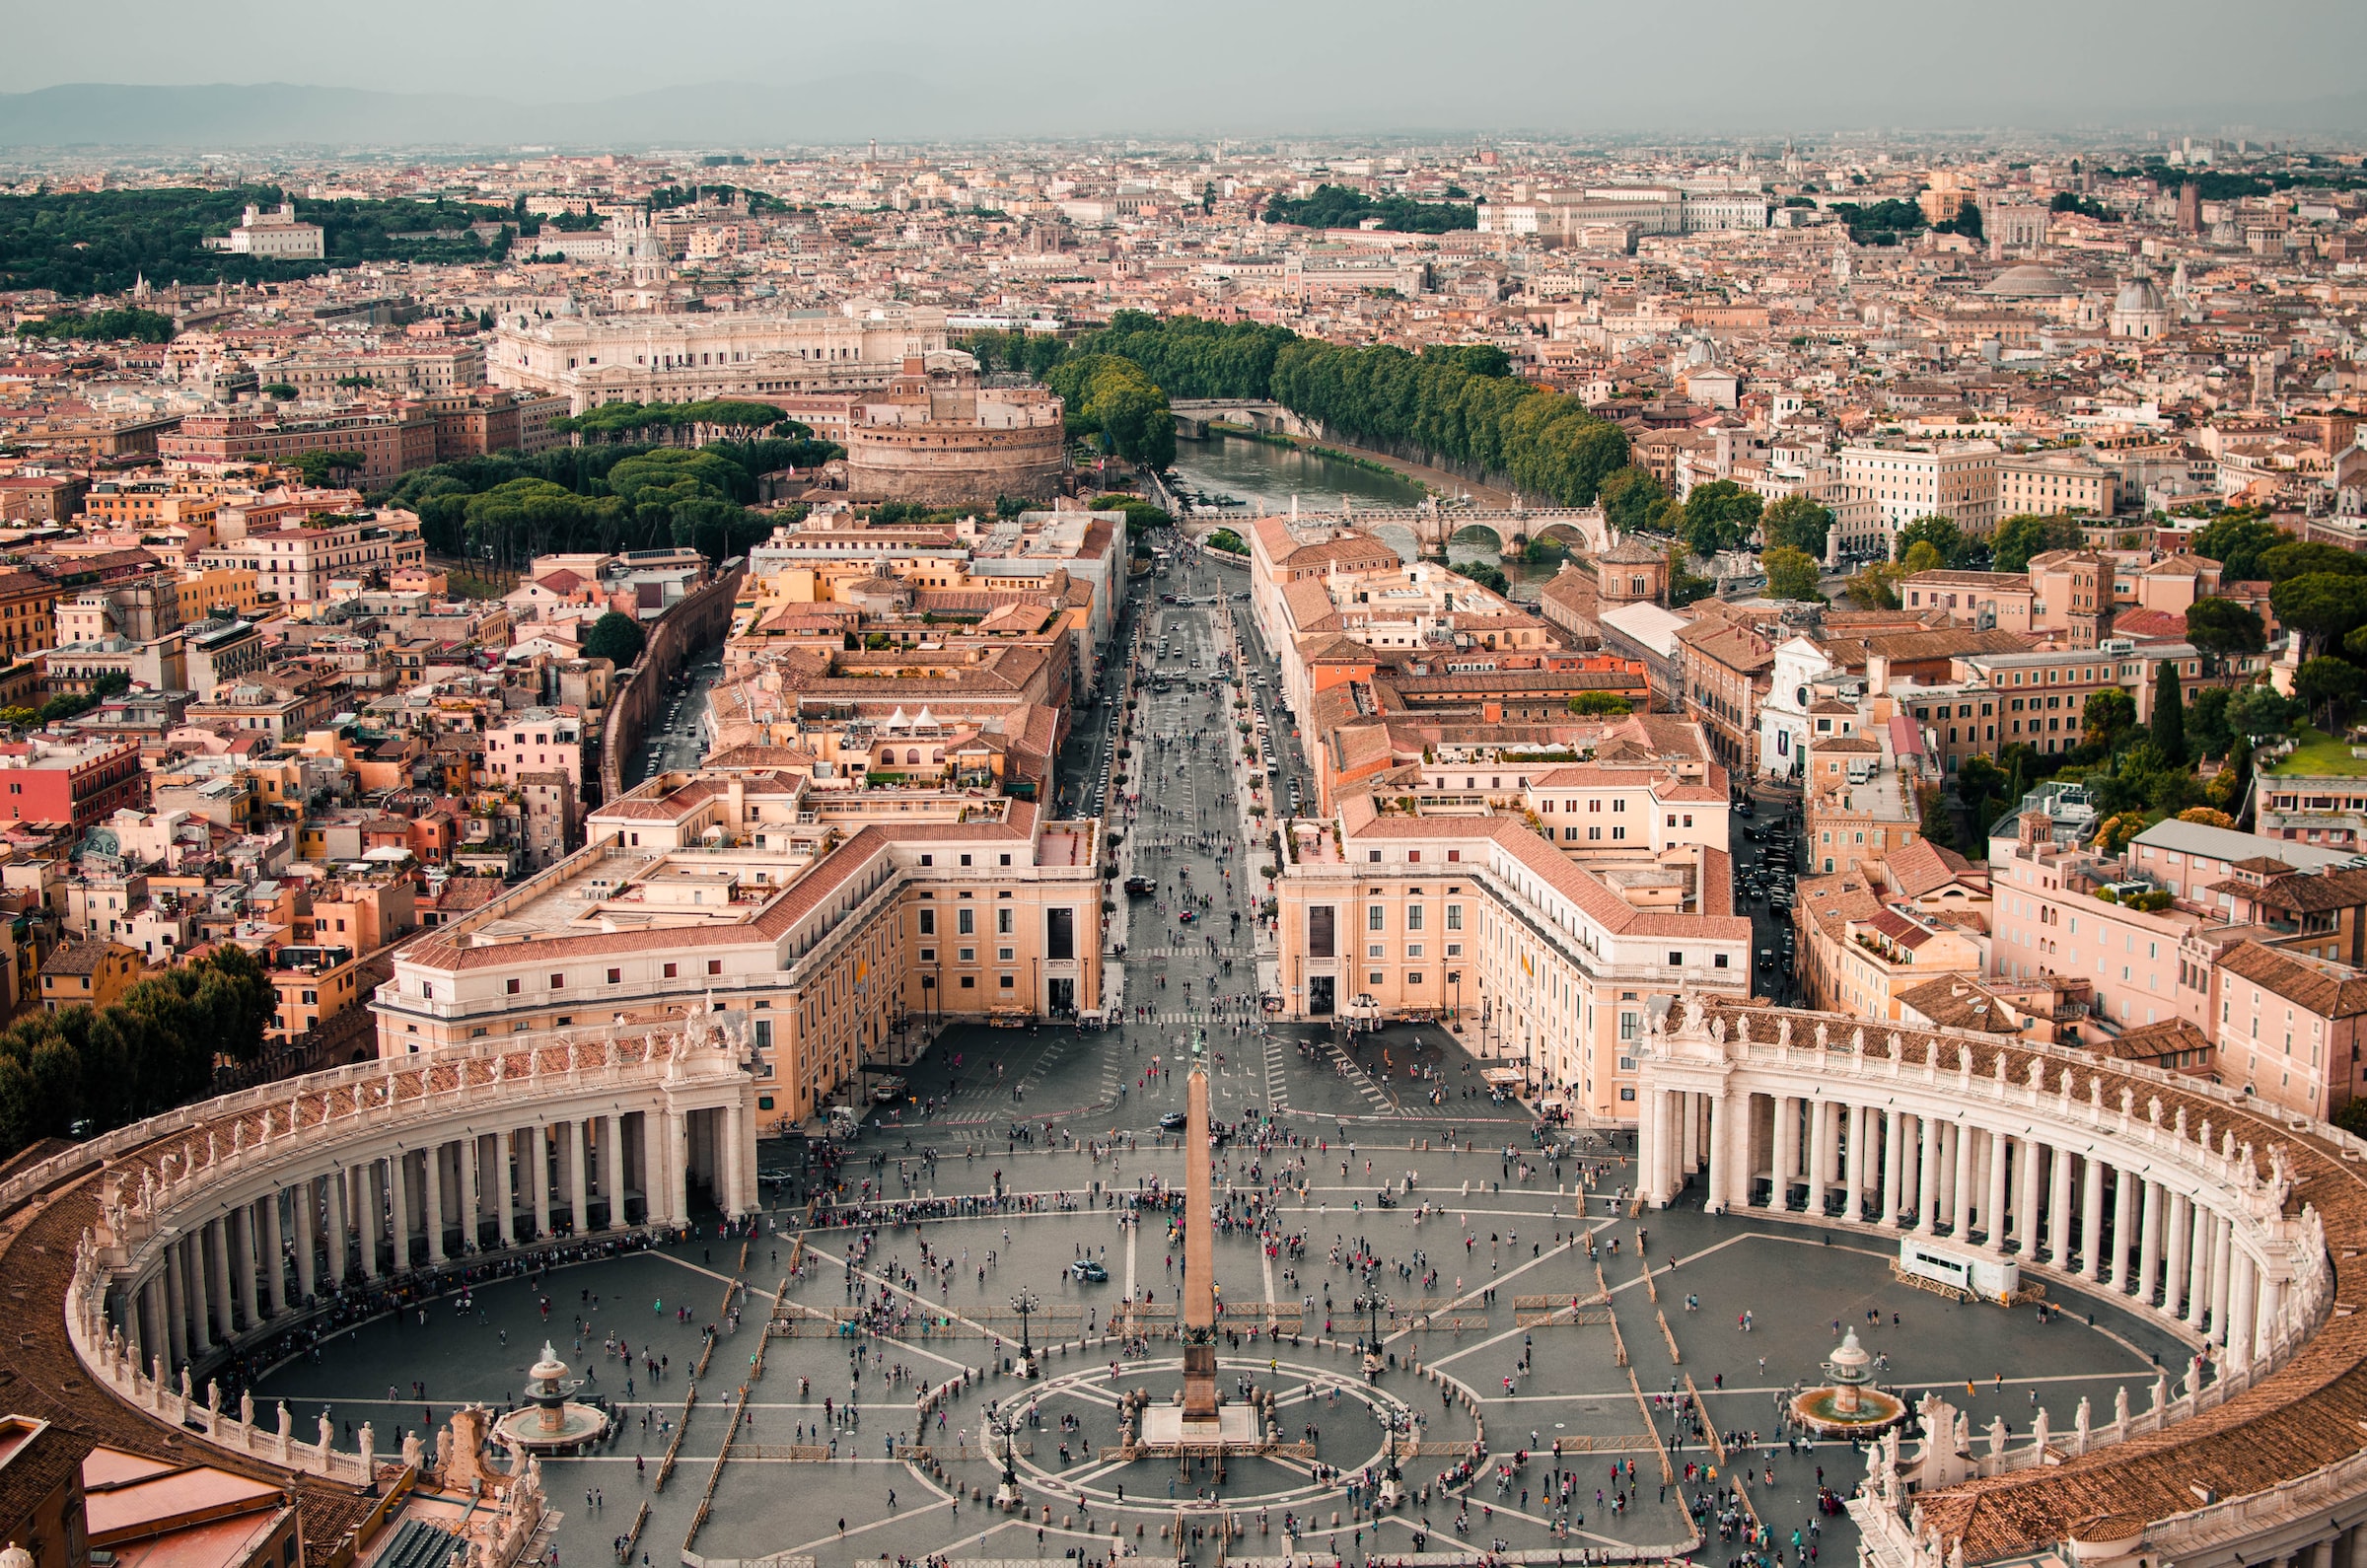 Day 13 - Guided tour of Rome and Vatican City